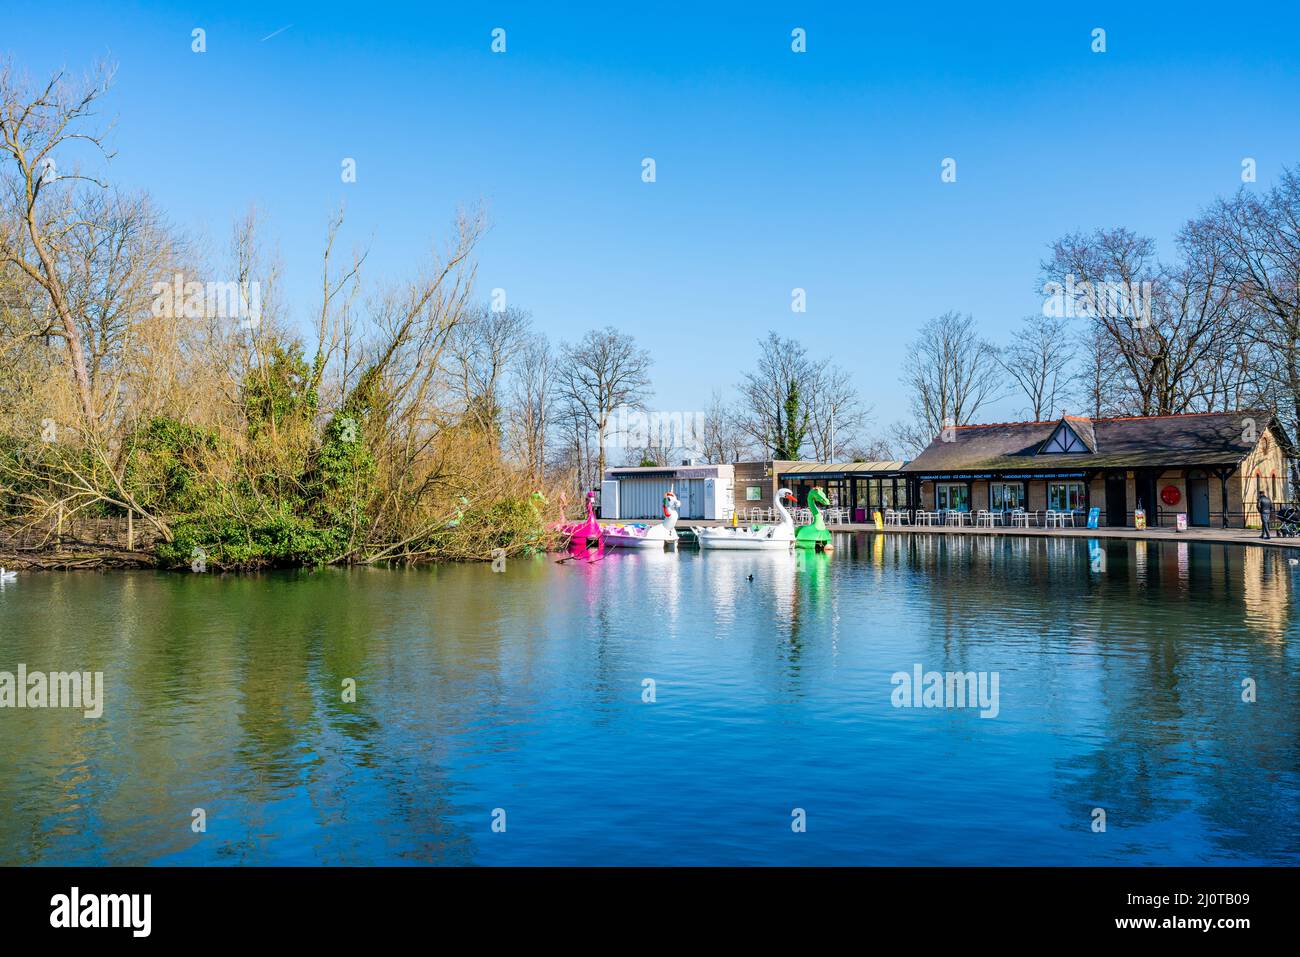 LONDON, UK - MARCH 19, 2022: View of boating lake with Lakeside Café and pedal boats on at Alexandra Palace in London Stock Photo